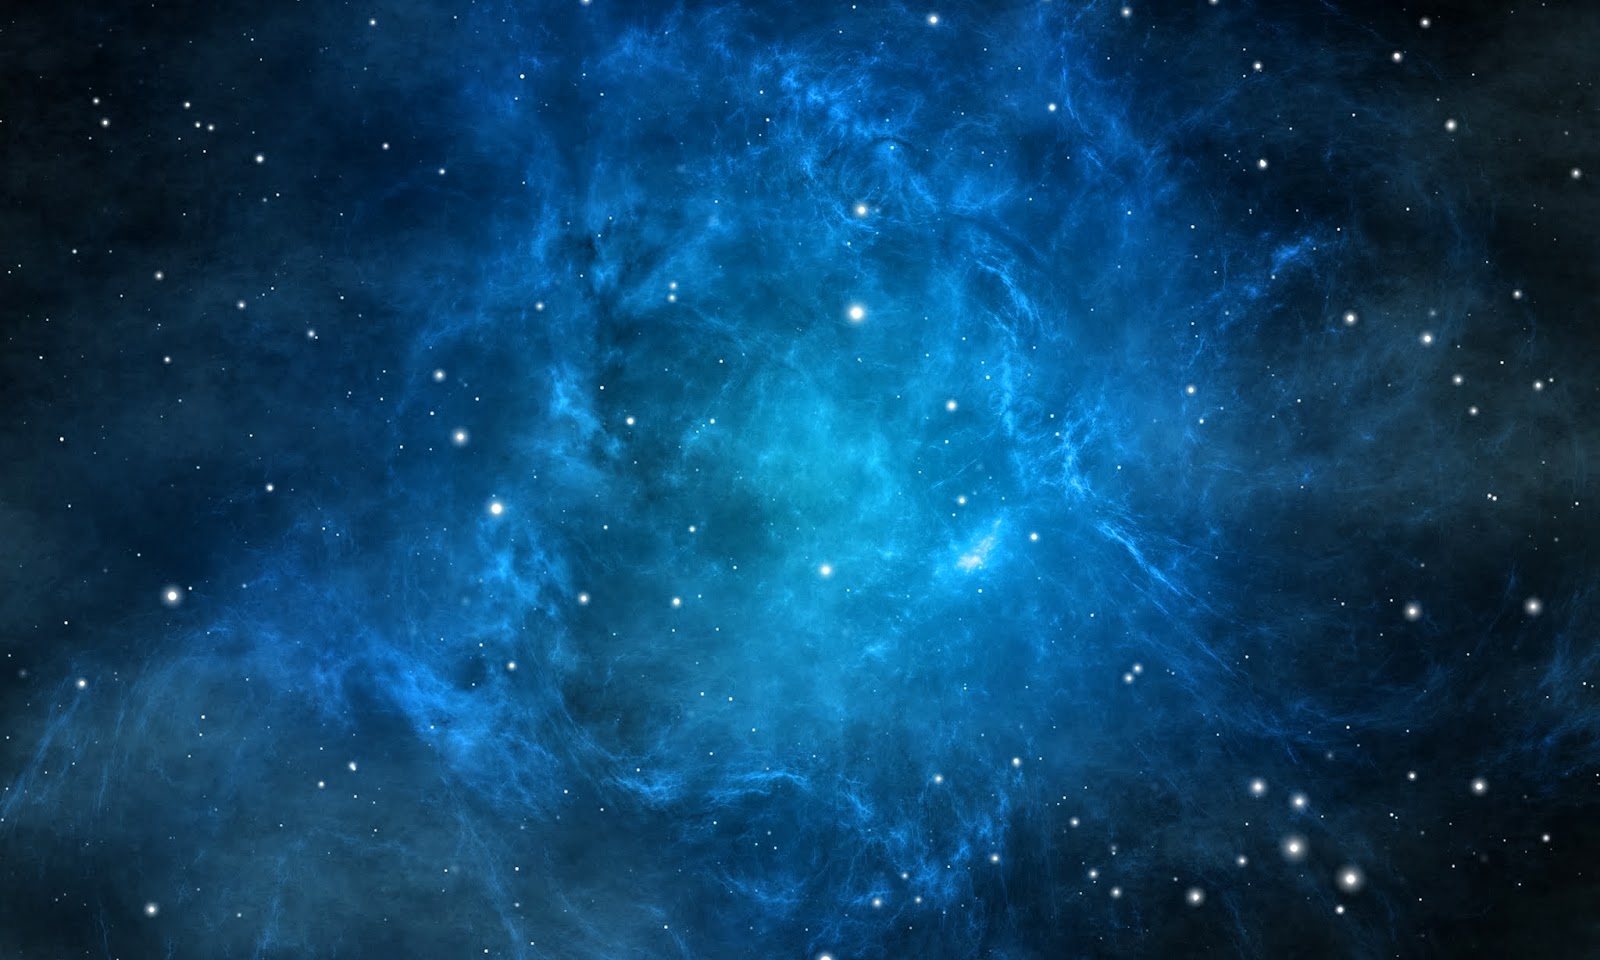 Star Abstract Hd Wallpapers Hd Wallpapers High Definition Free Background